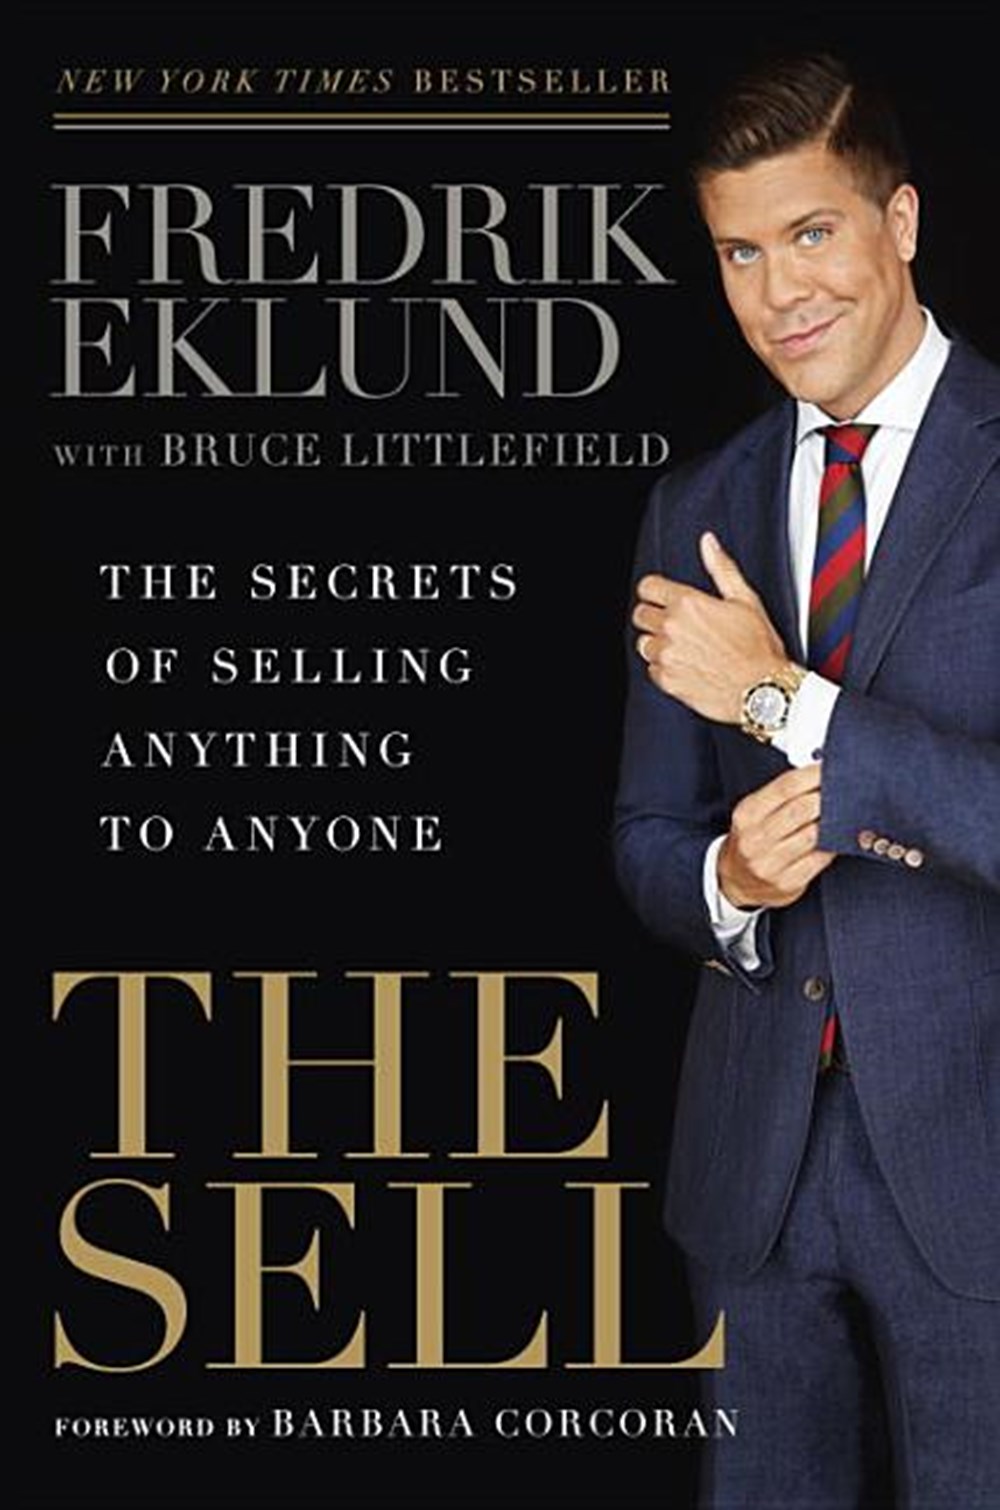 Sell: The Secrets of Selling Anything to Anyone